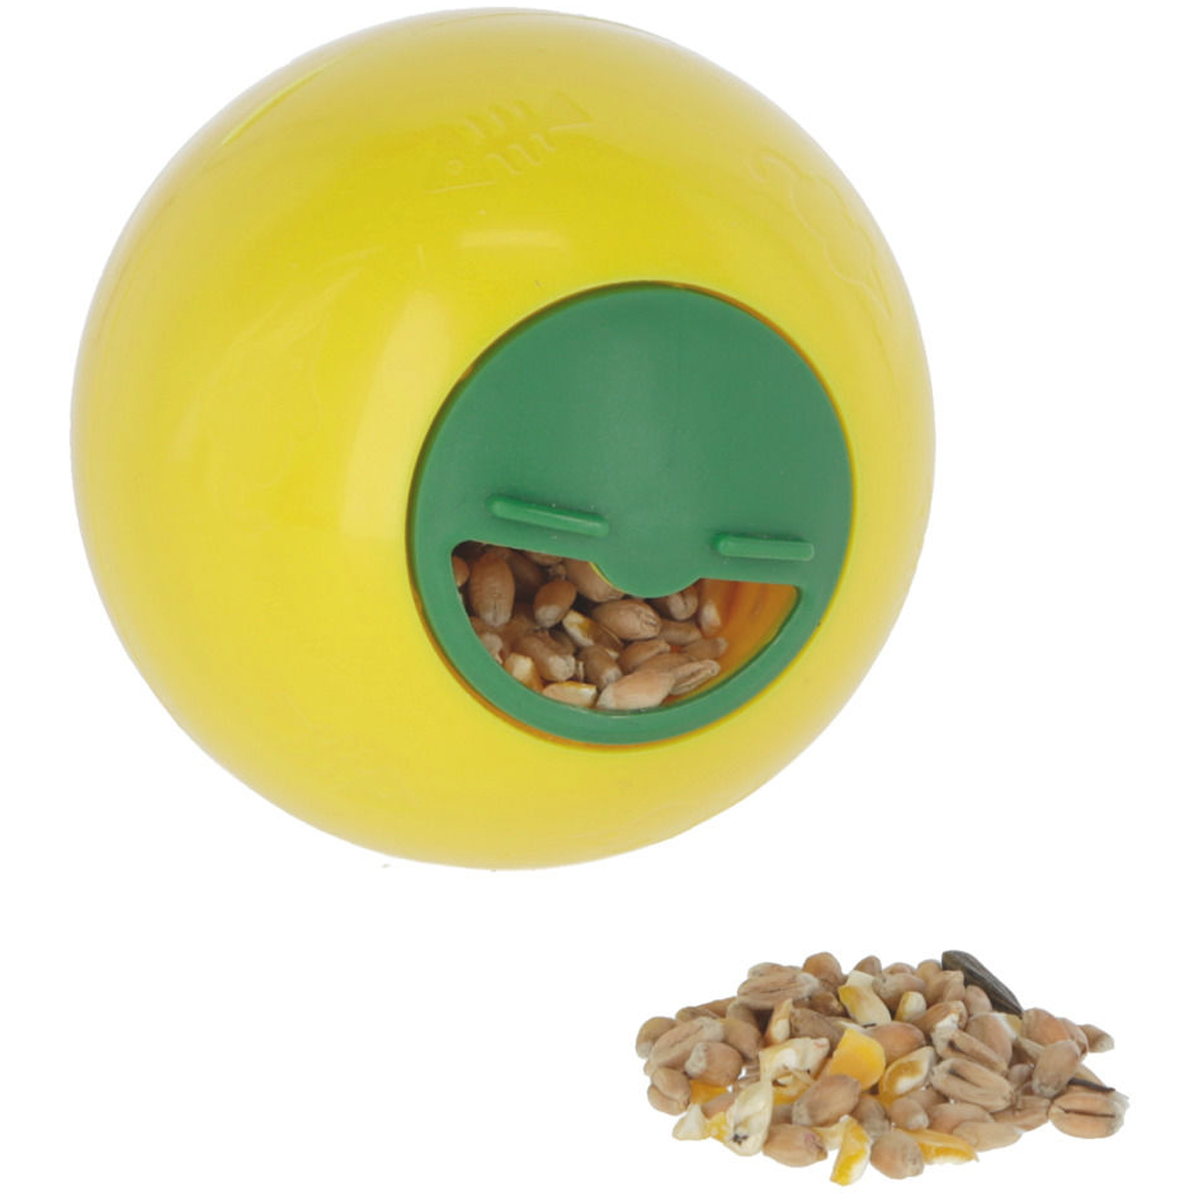 Snack ball for cats and chickens